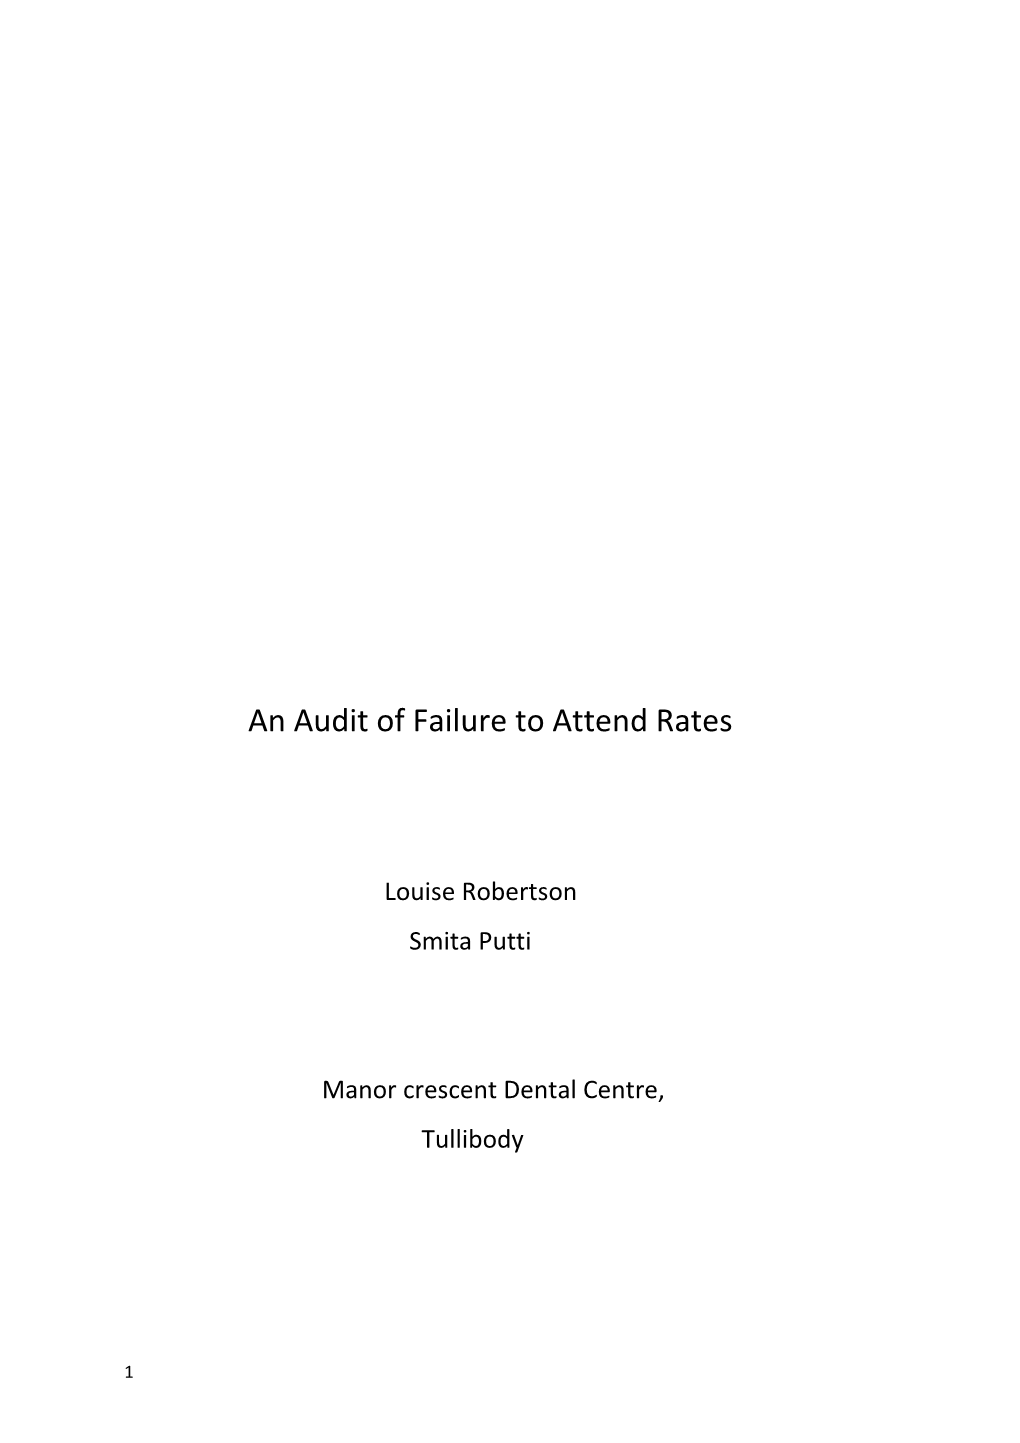 An Audit of Failure to Attend Rates